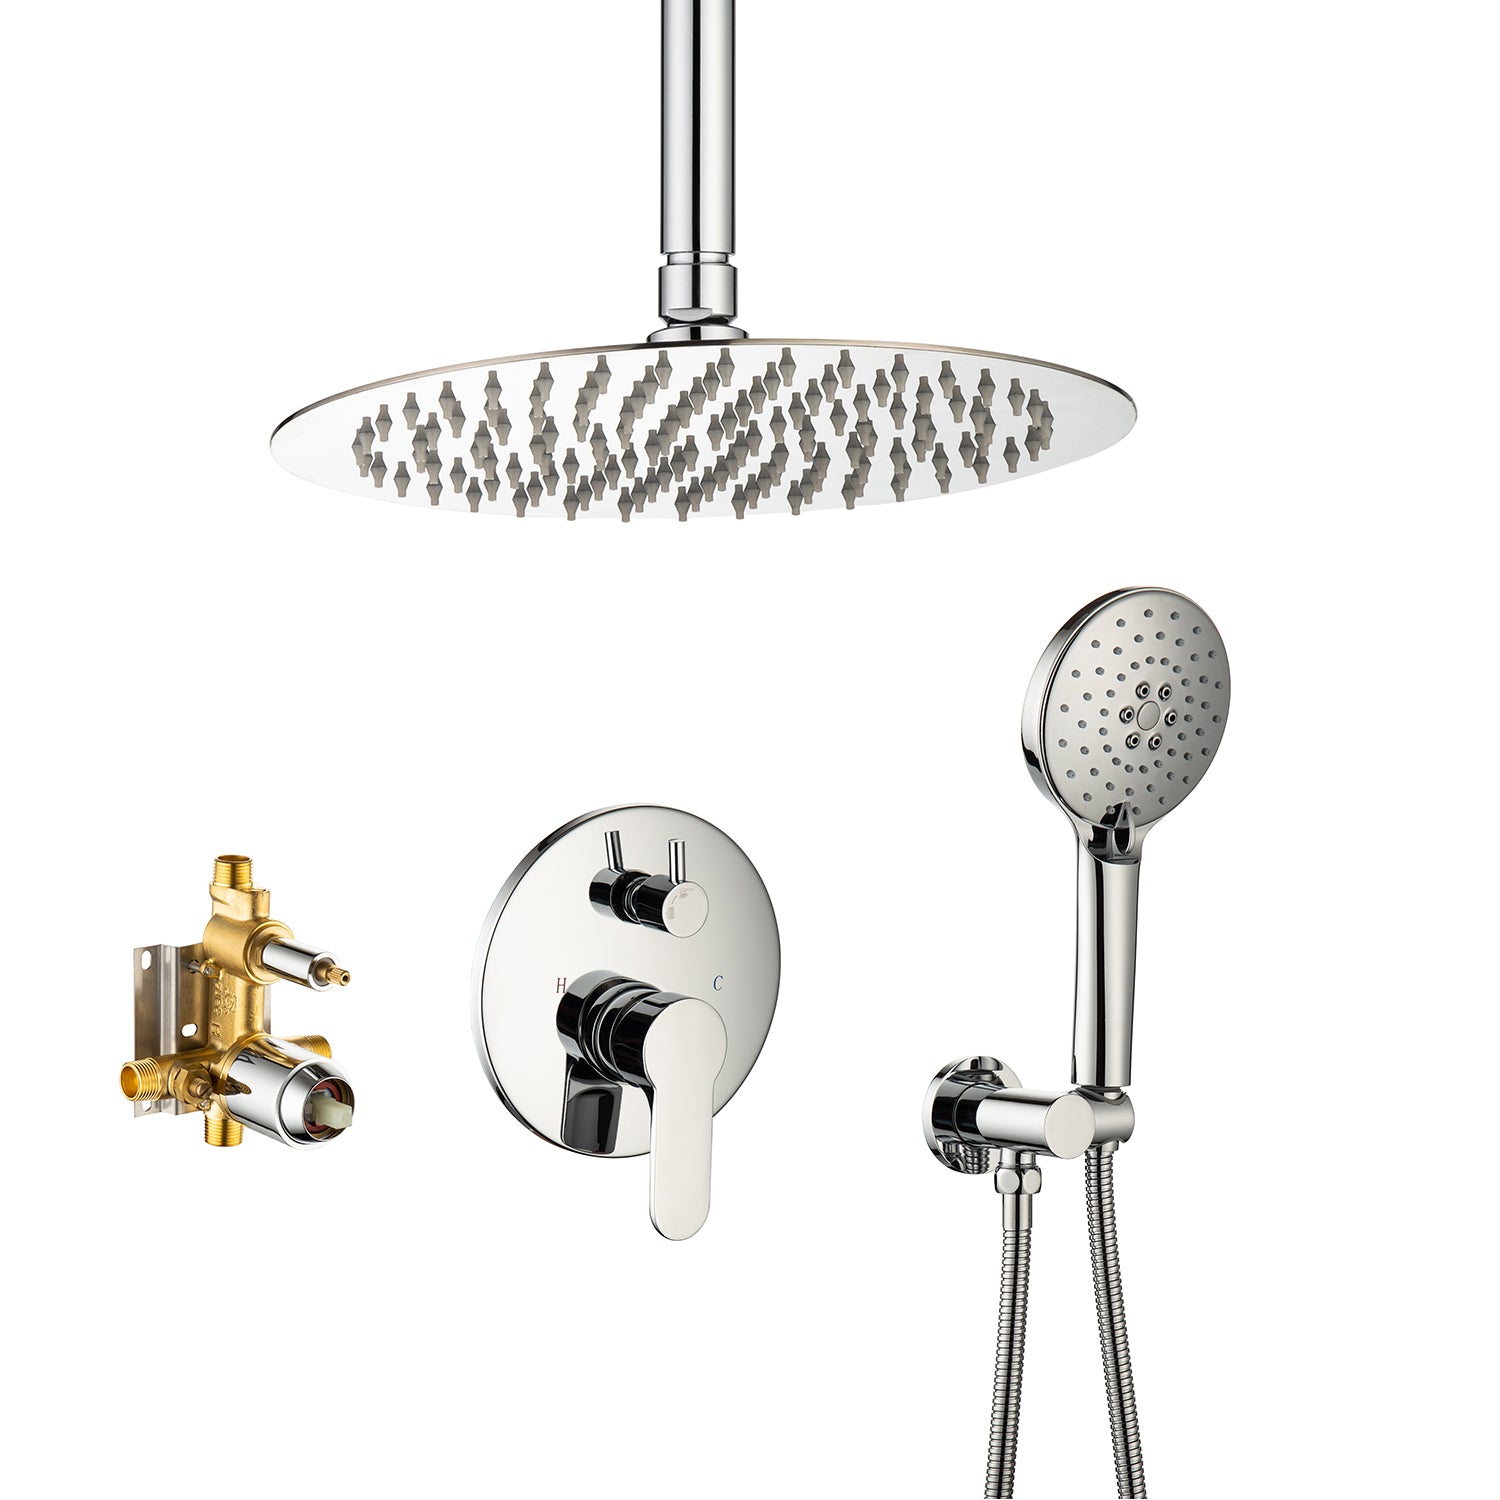 【Rainlex RX96205-10】10" Shower Head  Dual Functions Ceiling-Mount  Balance Round Shower Faucet(Rough-in Valve Included)